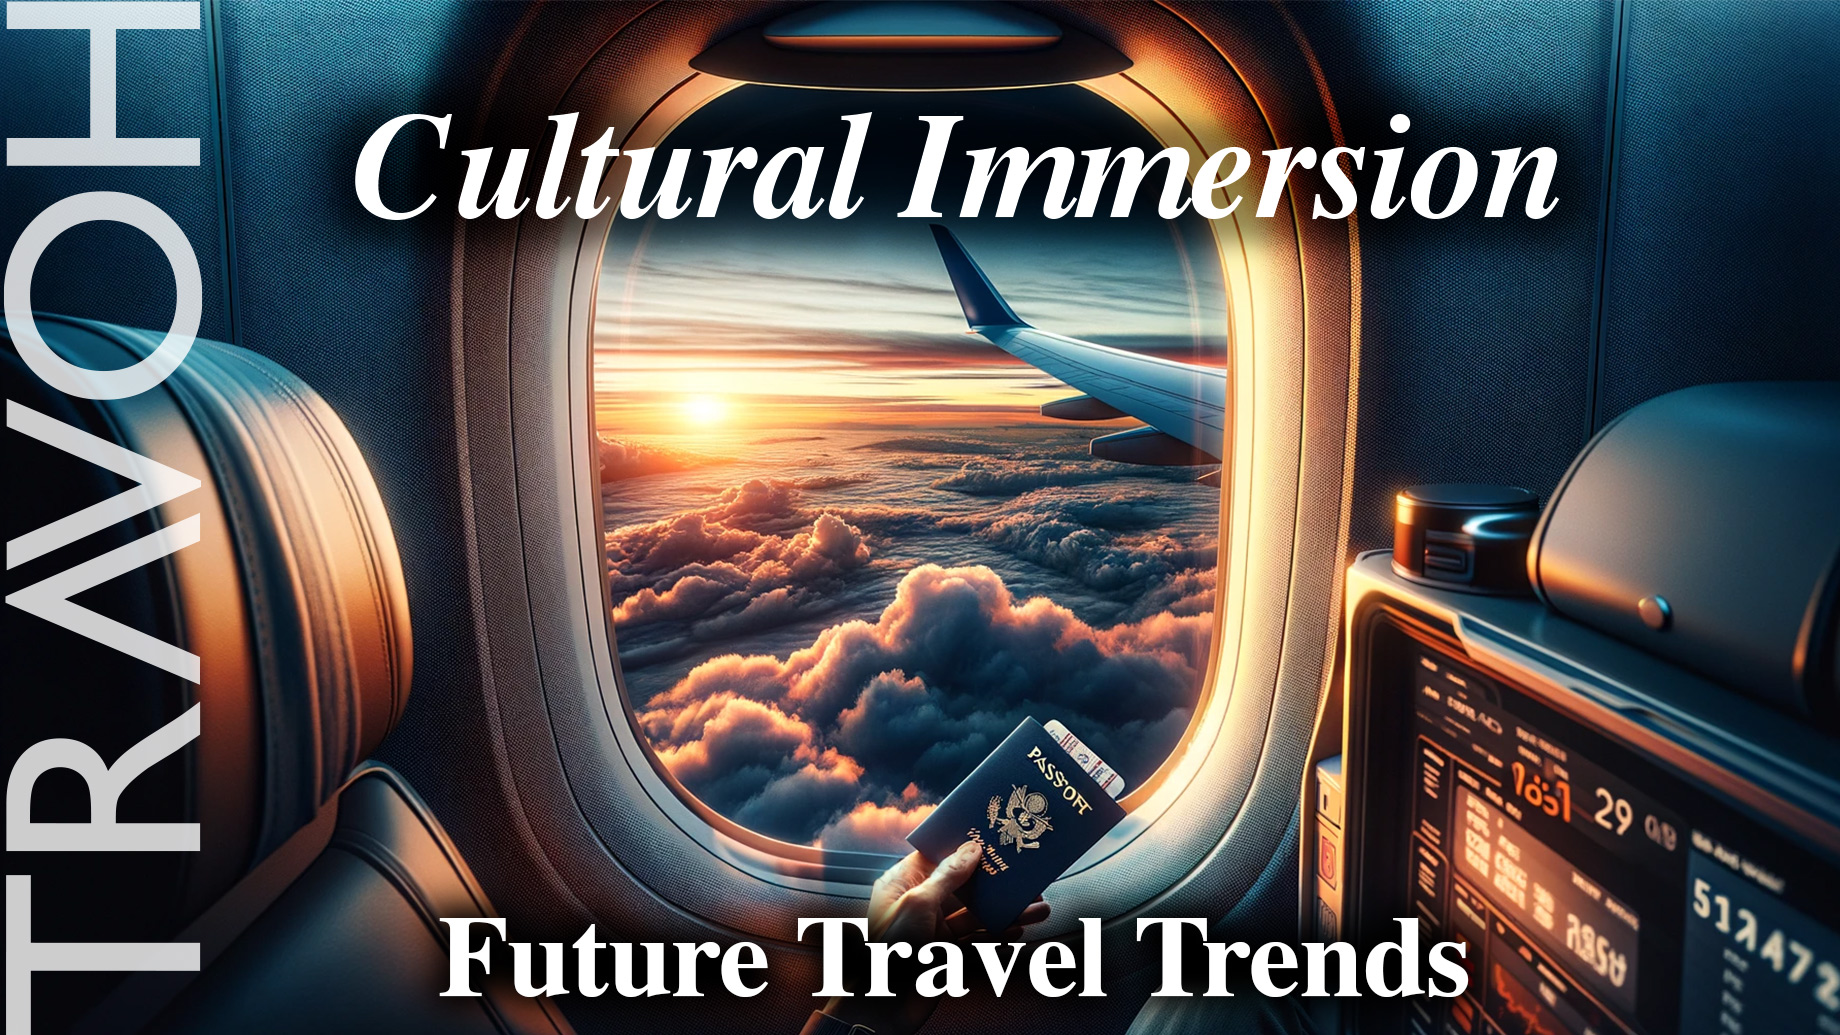 Cultural Immersion – Future Travel Trends Shaping Authentic Experiences